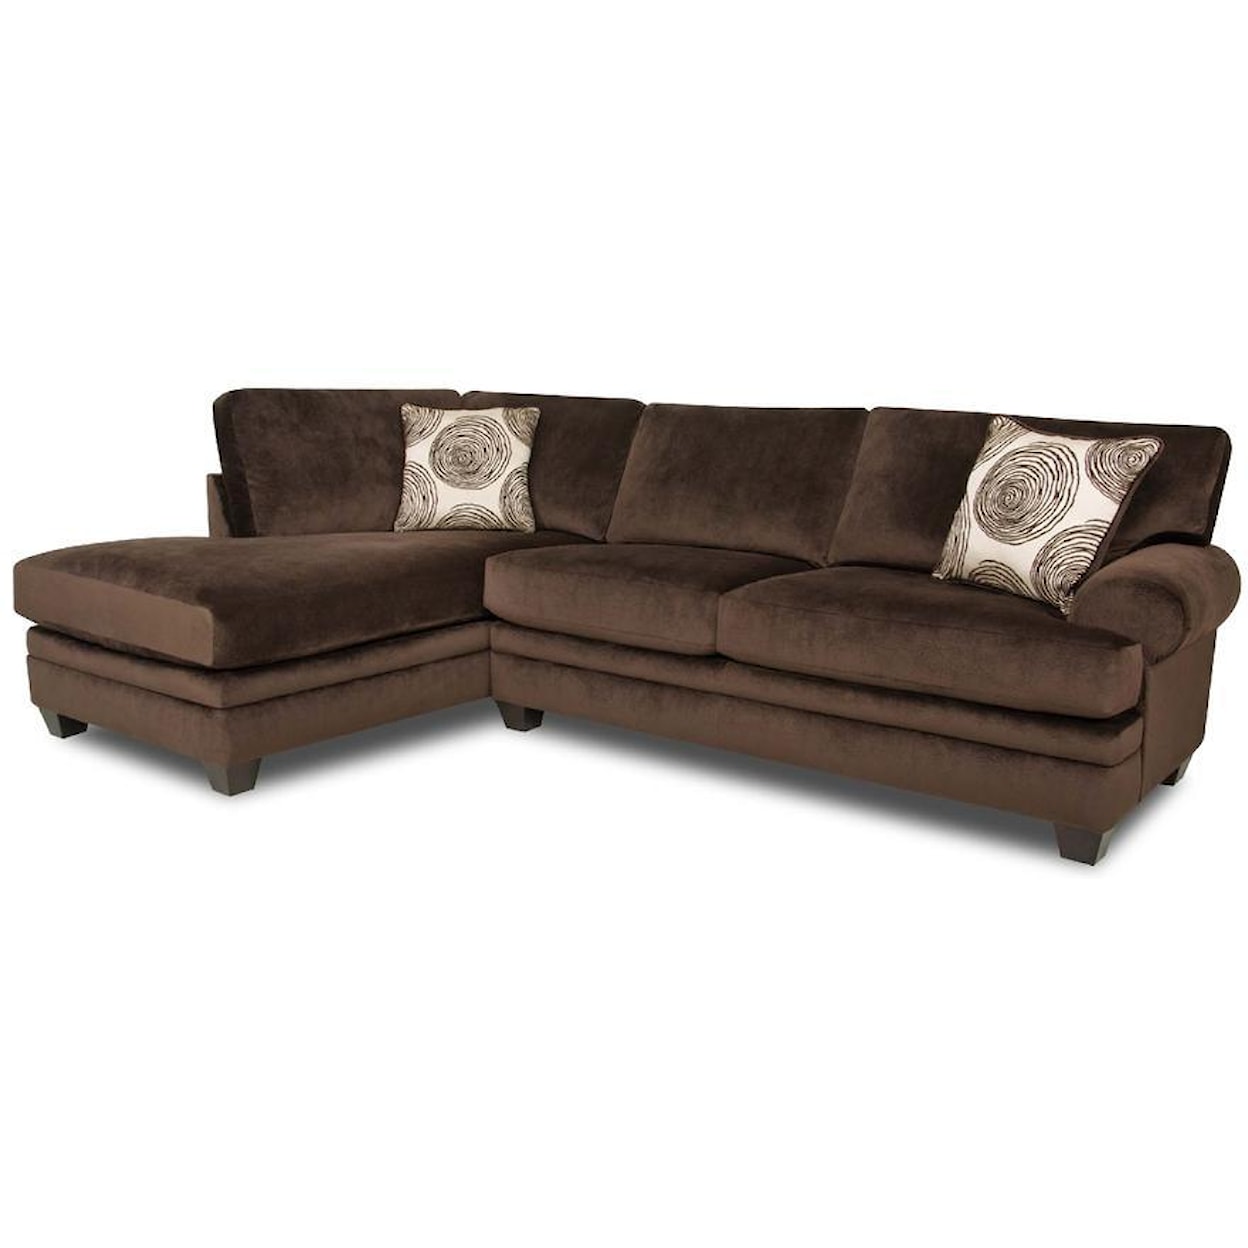 Albany 8642 Transitional Sectional Sofa